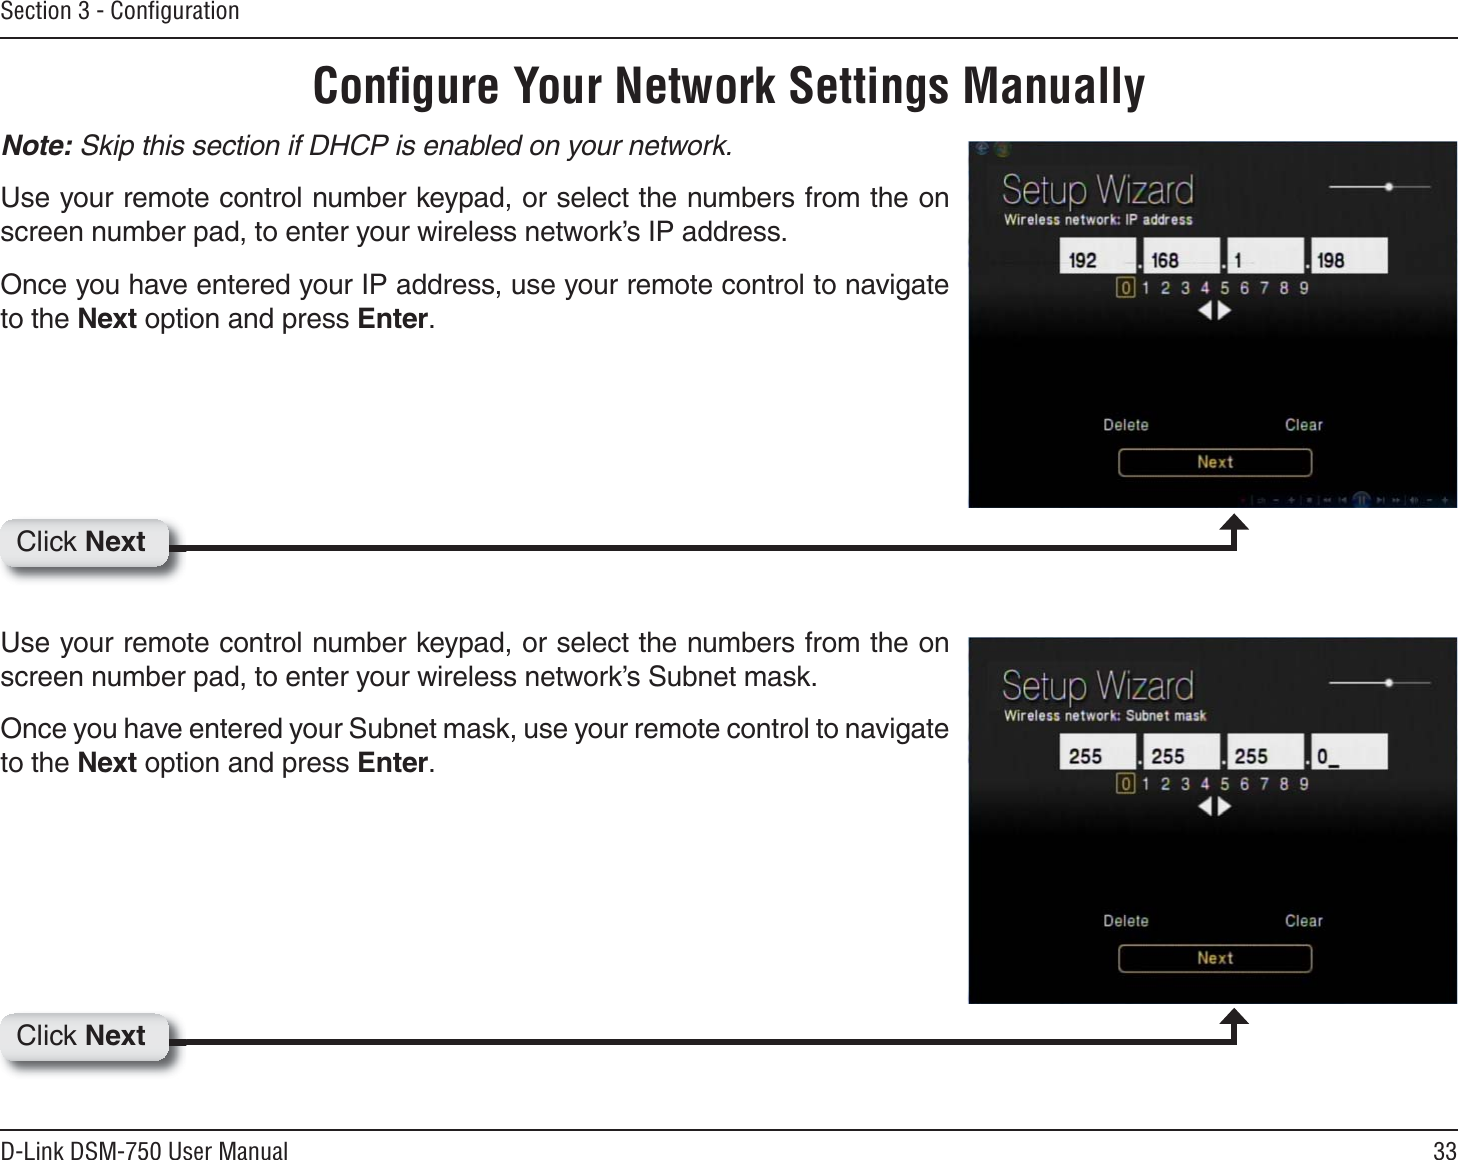 33D-Link DSM-750 User ManualSection 3 - ConﬁgurationConﬁgure Your Network Settings ManuallyNote: Skip this section if DHCP is enabled on your network.Use your remote control number keypad, or select the numbers from the on screen number pad, to enter your wireless network’s IP address.Once you have entered your IP address, use your remote control to navigate to the Next option and press Enter.Use your remote control number keypad, or select the numbers from the on screen number pad, to enter your wireless network’s Subnet mask.Once you have entered your Subnet mask, use your remote control to navigate to the Next option and press Enter.Click NextClick Next